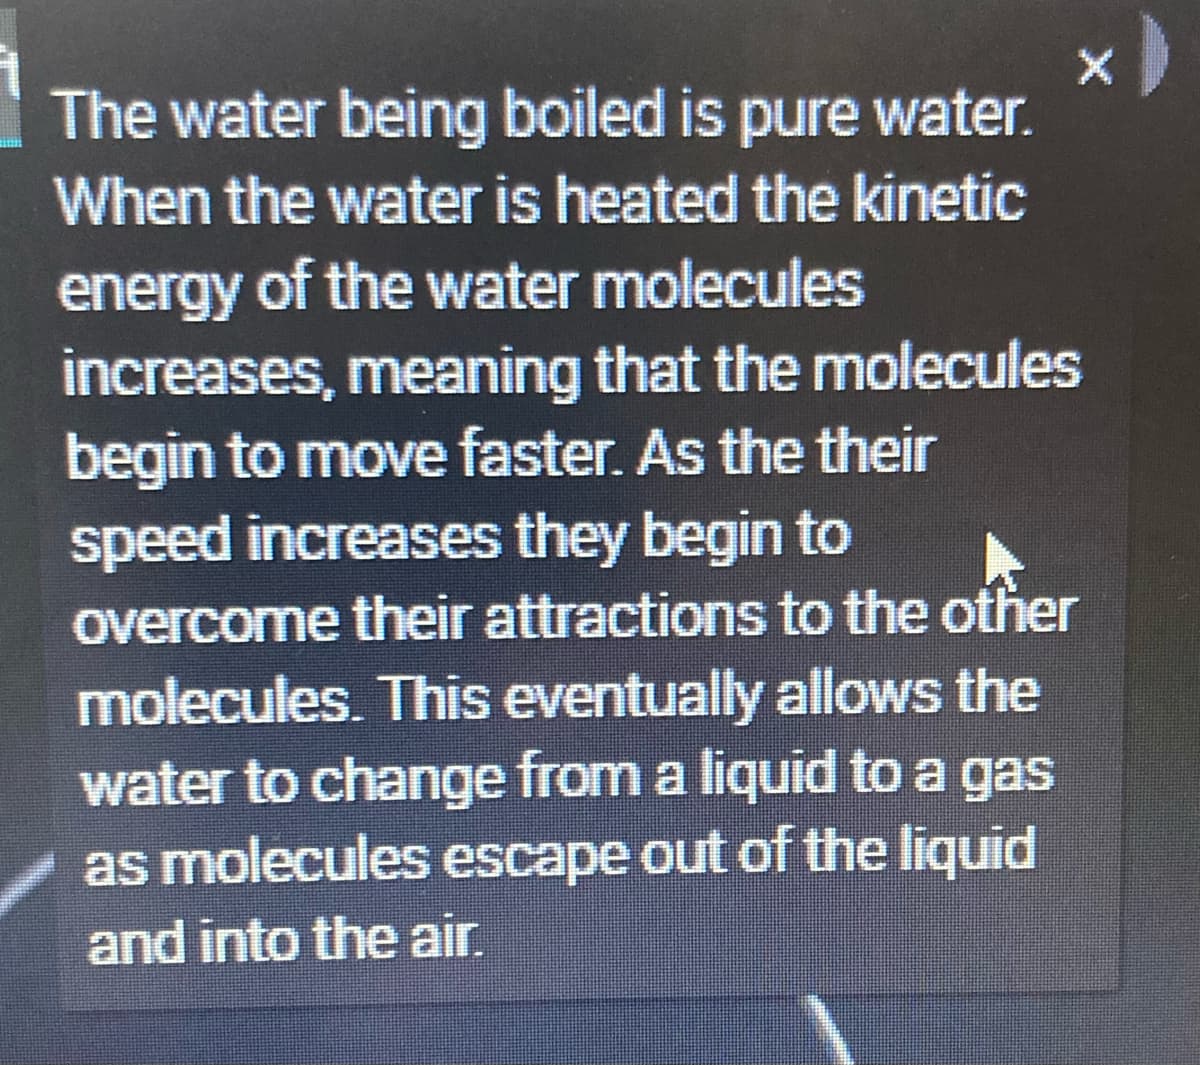 The water being boiled is pure water.
When the water is heated the kinetic
energy of the water molecules
increases, meaning that the molecules
begin to move faster. As the their
speed increases they begin to
overcome their attractions to the other
molecules. This eventually allows the
water to change from a liquid to a gas
as molecules escape out of the liquid
and into the air.